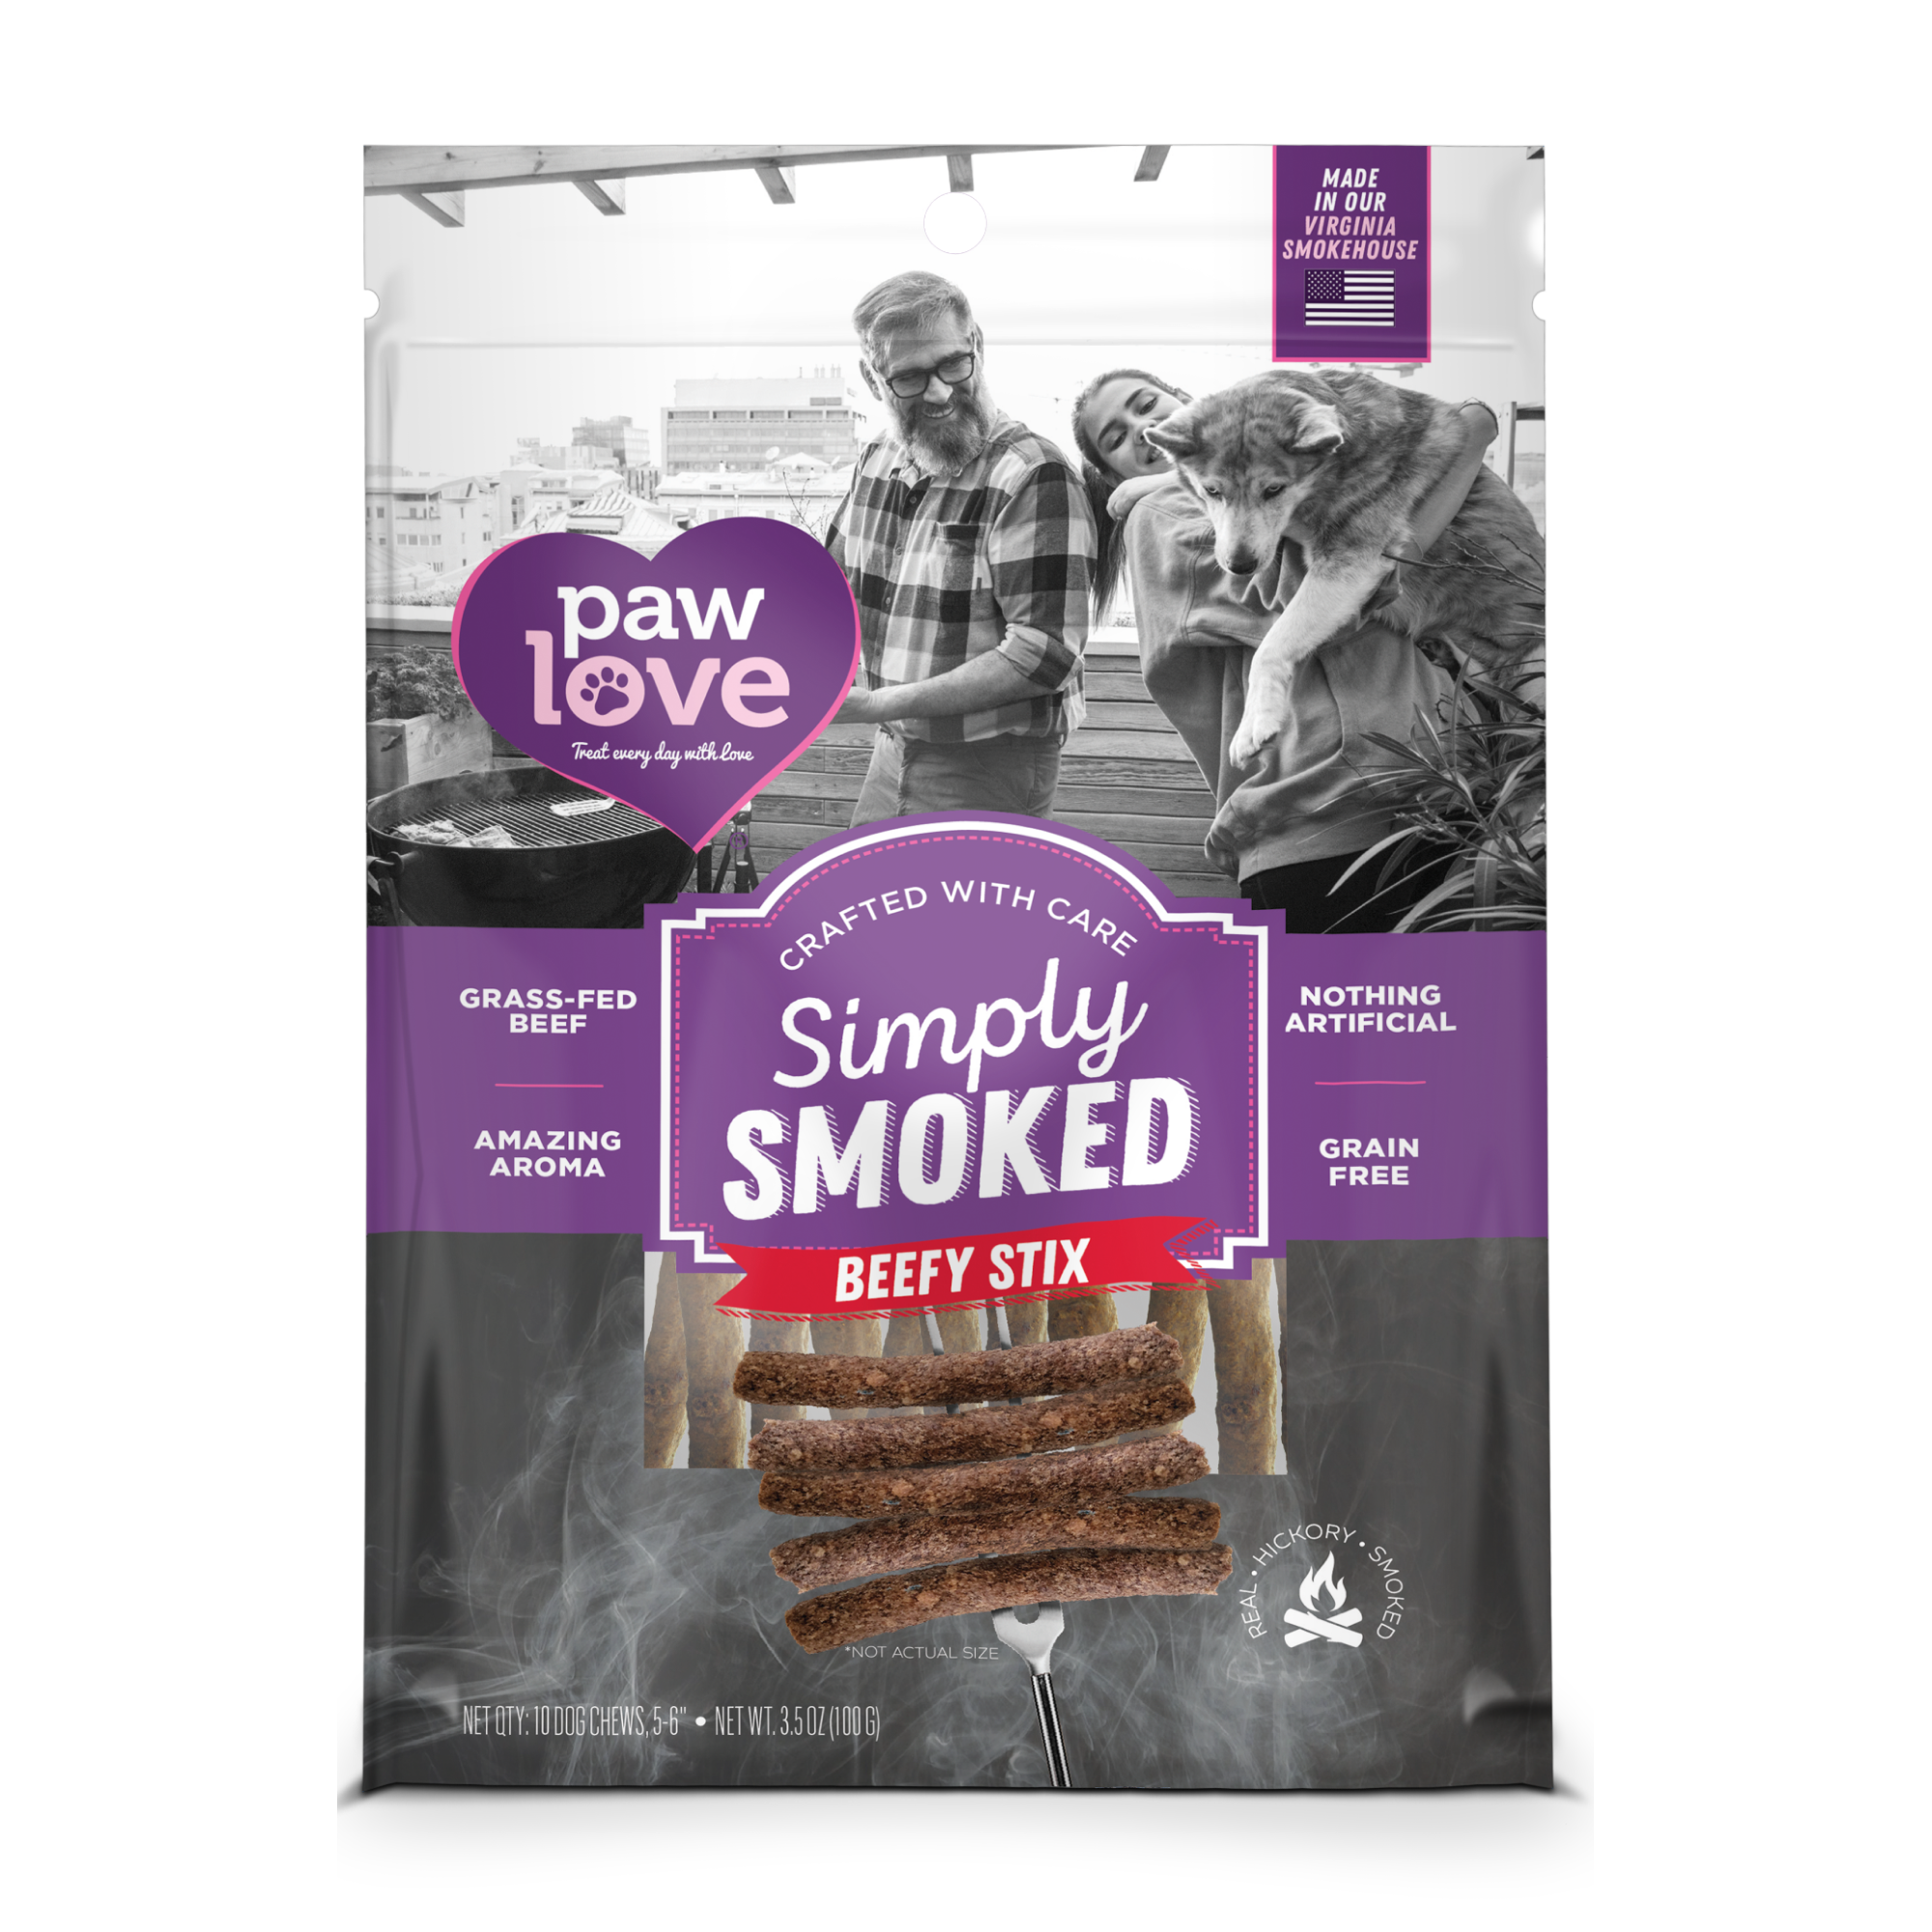 Simply Smoked Beefy Stix 10 Pack, carefully smoked for a raw and authentic flavor that embodies pure Paw Love.